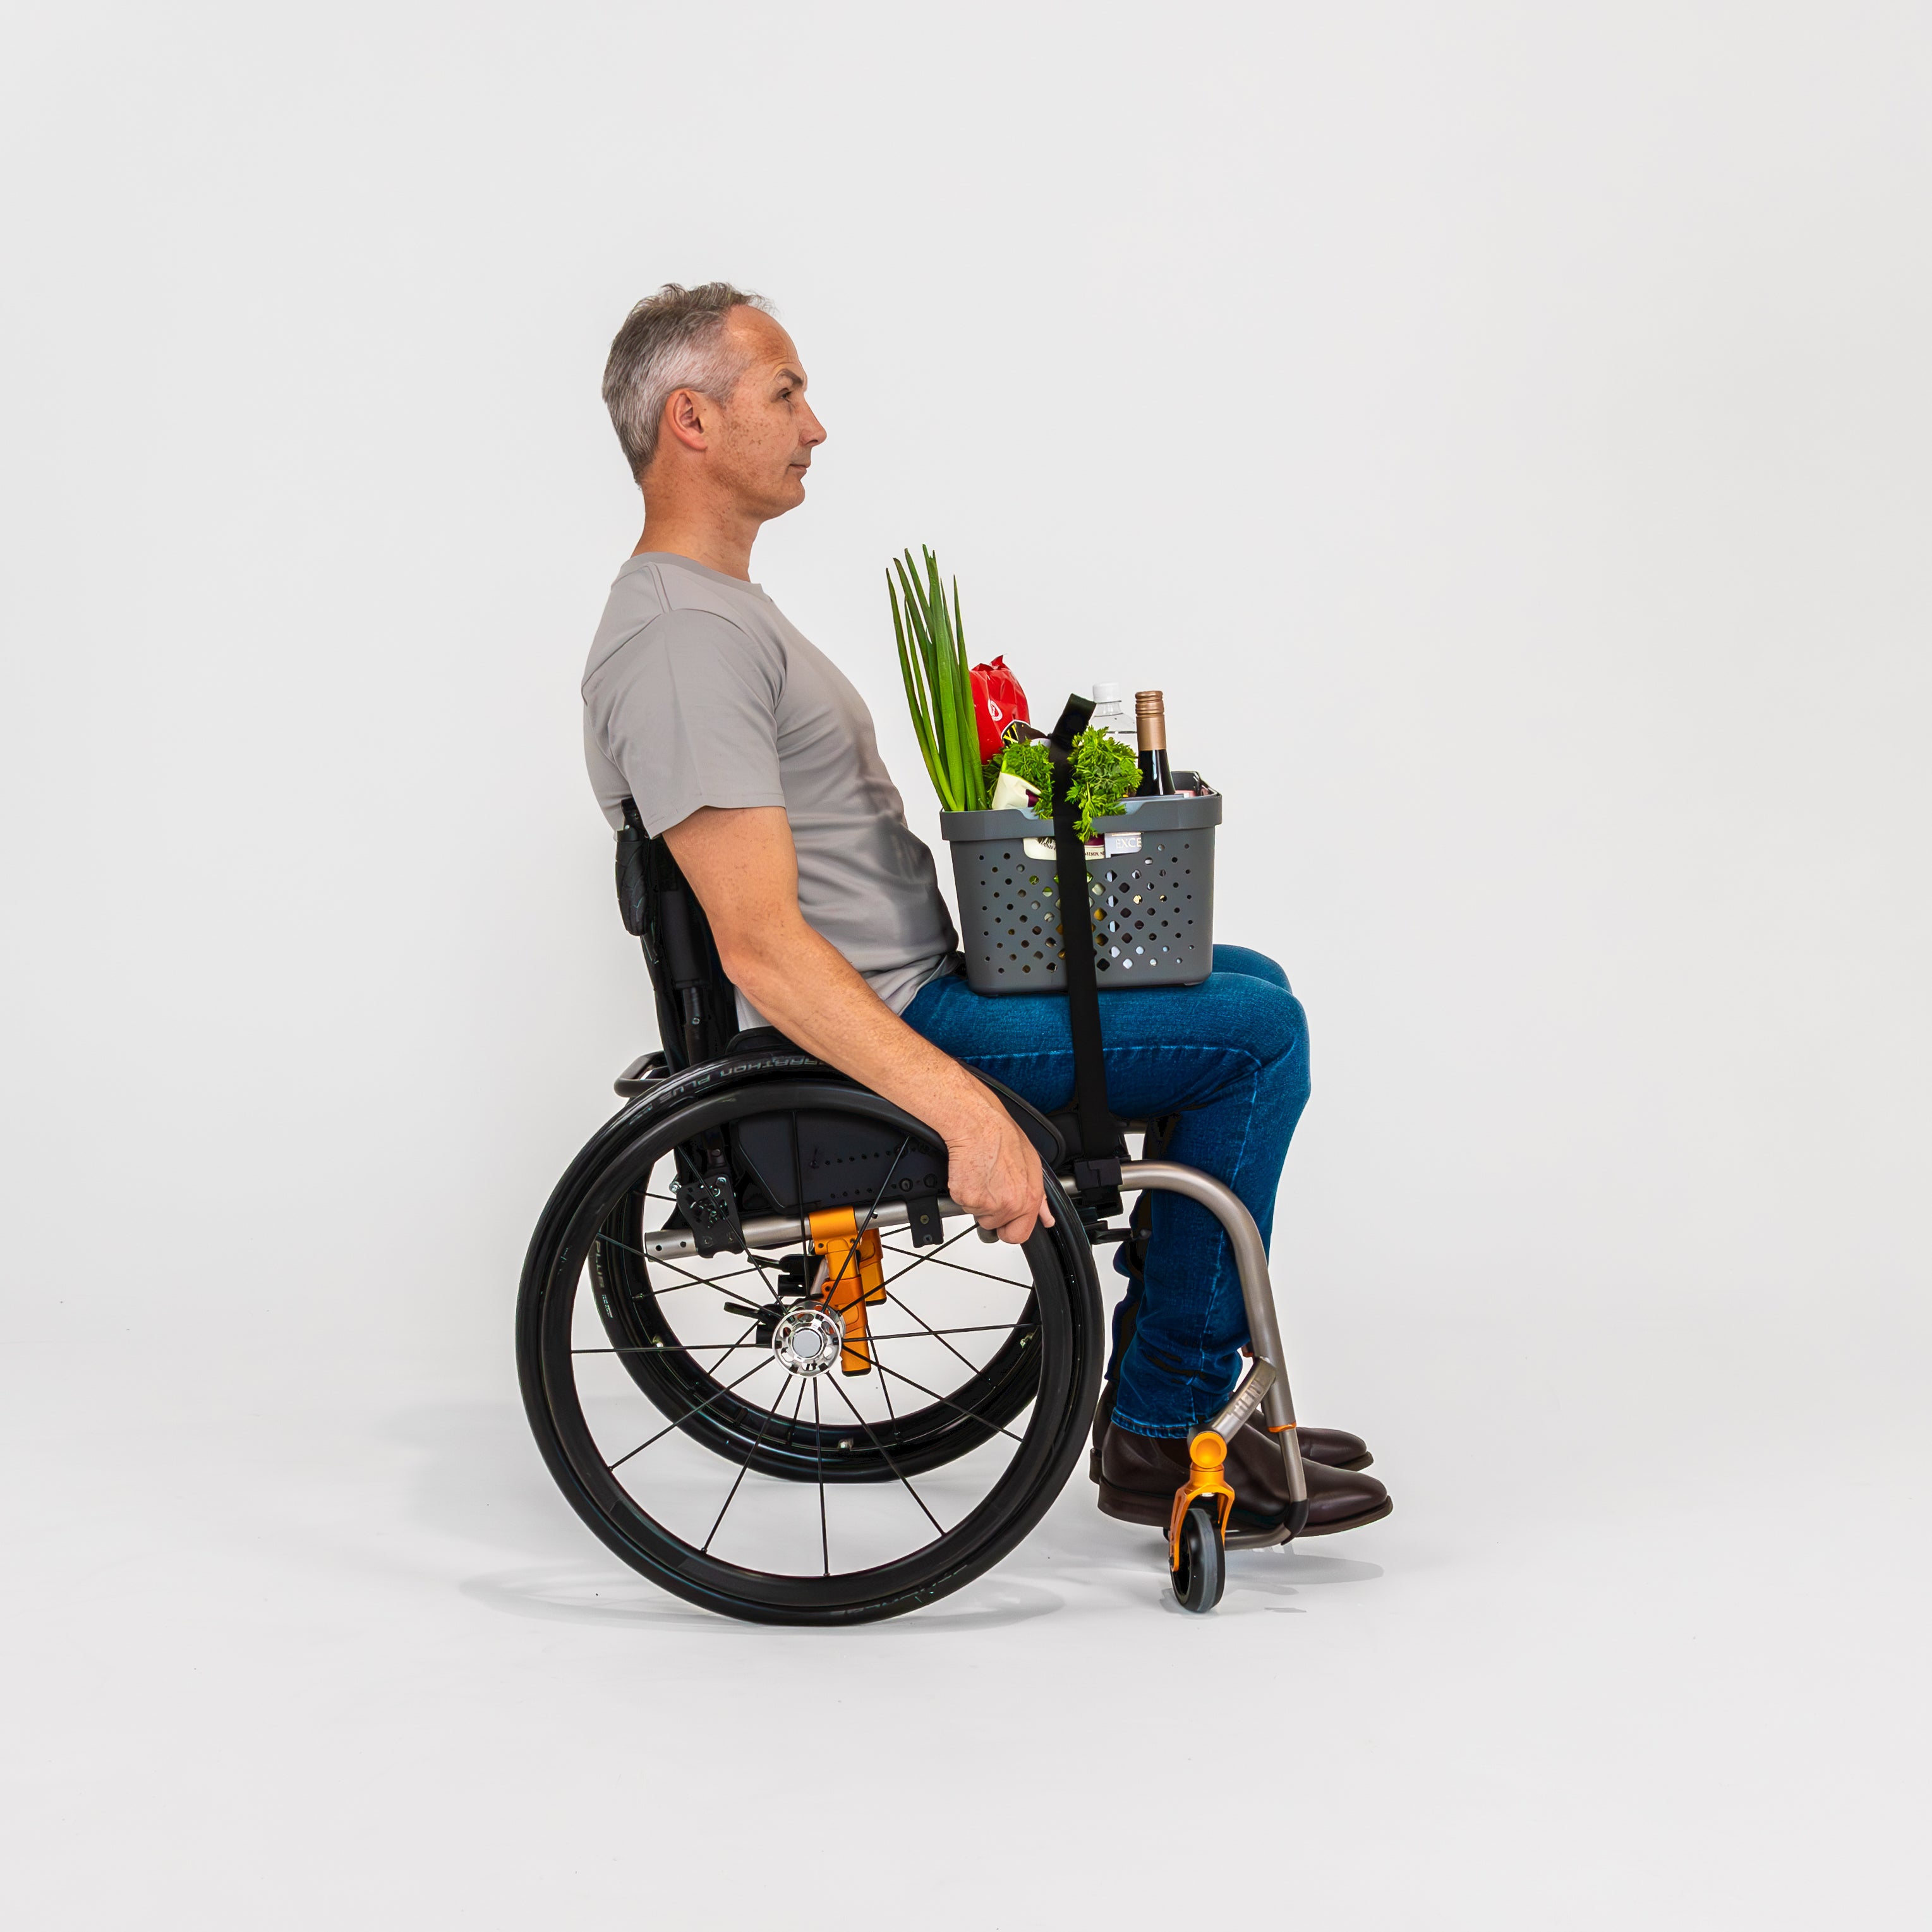 Smiling man seated in a wheelchair with a box of groceries secured to his lap using LapStacker Flex.